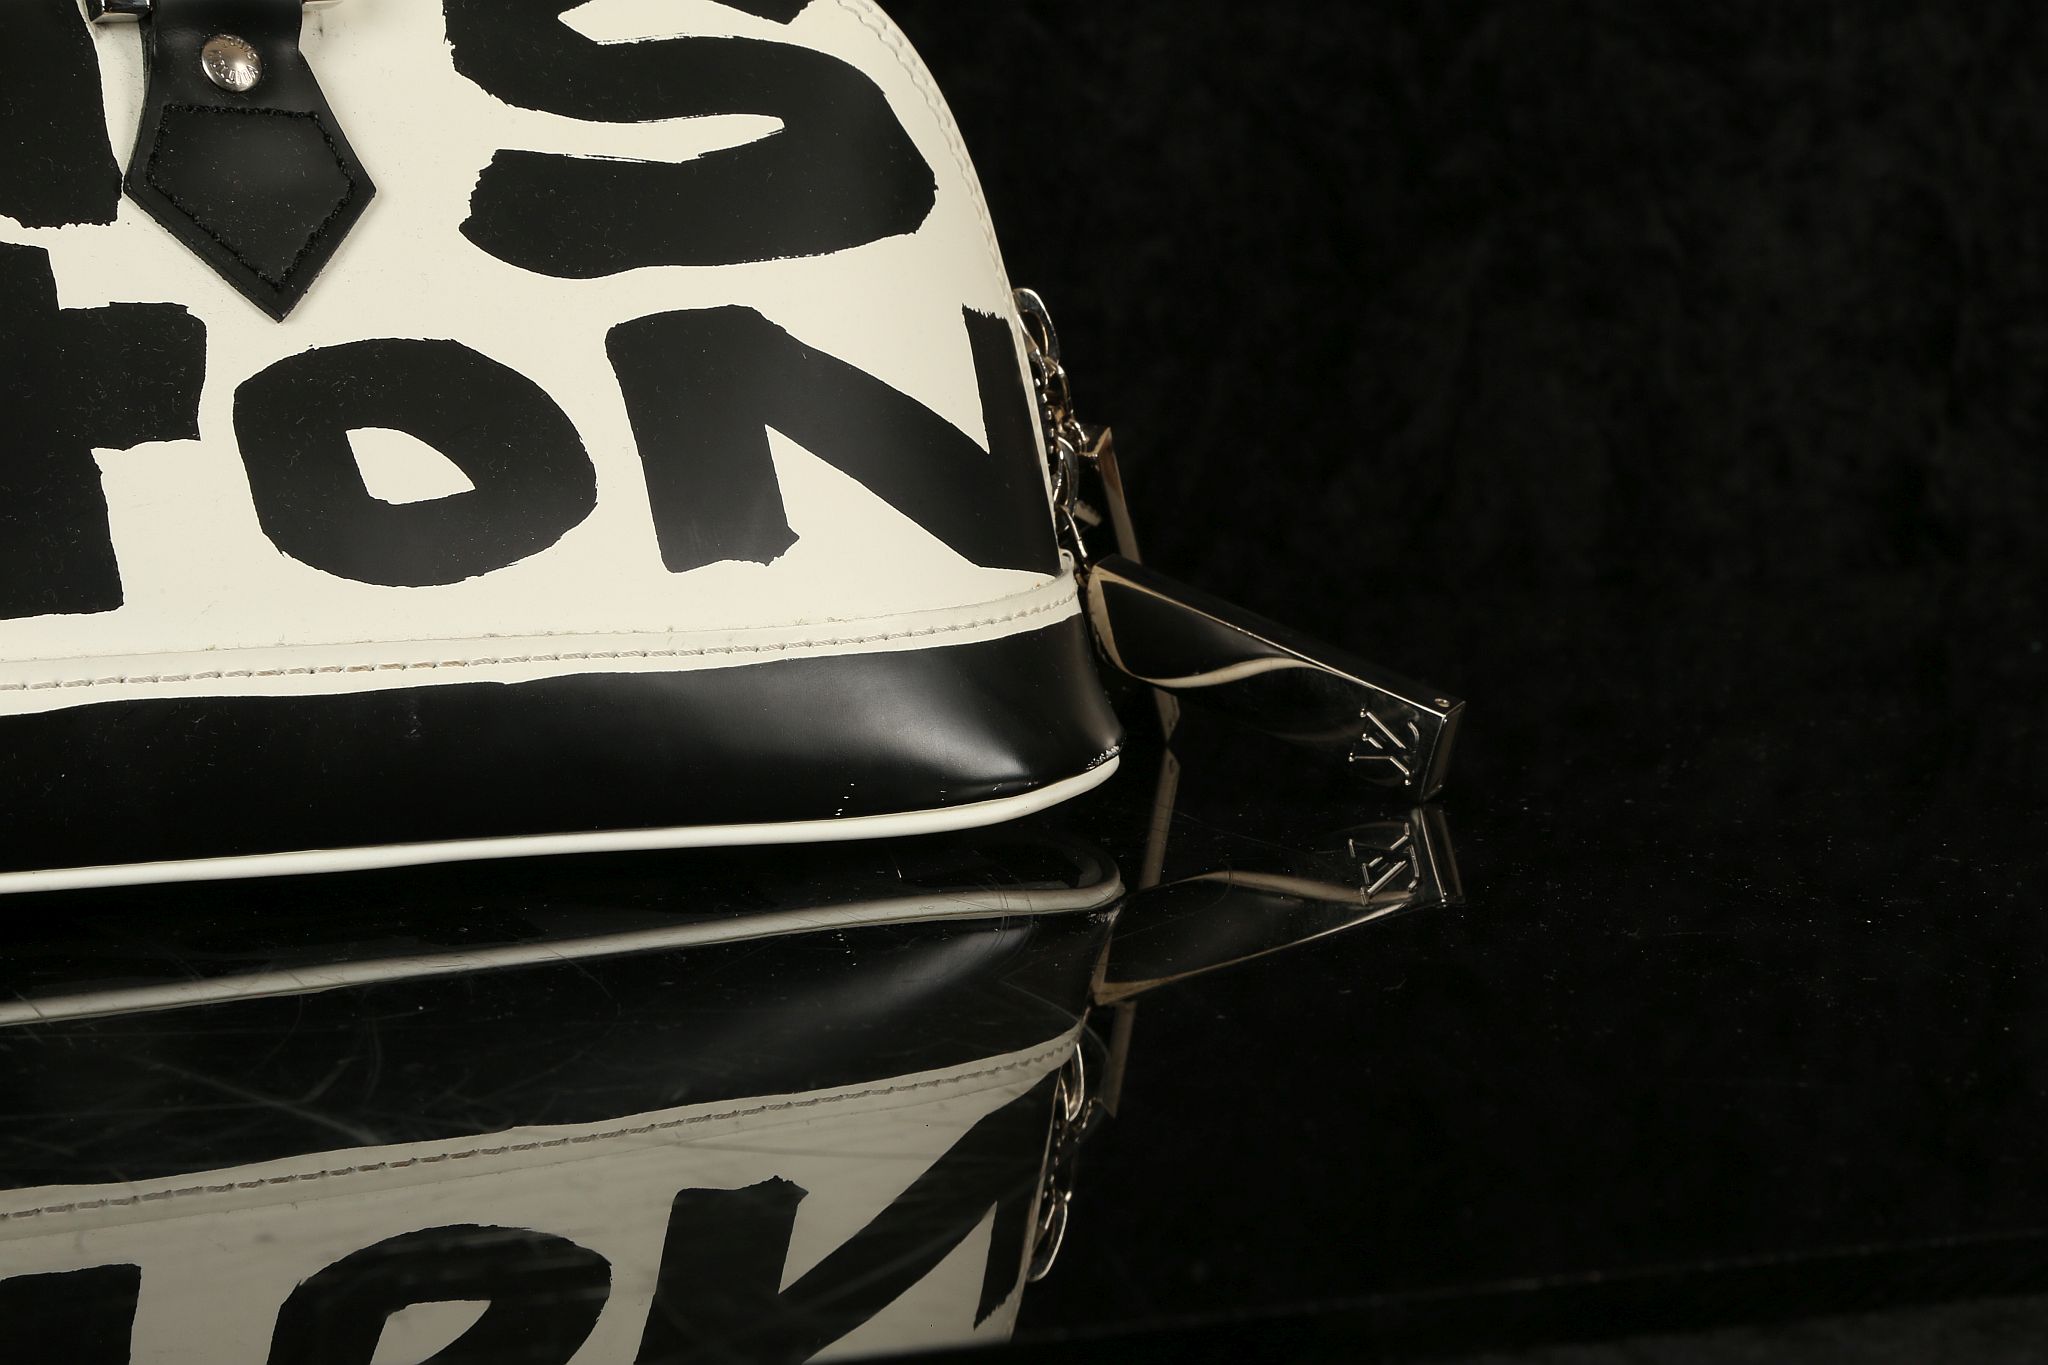 LOUIS VUITTON STEPHEN SPROUSE EAST/WEST ALMA BAG, date code for 2001, black and white graffiti - Image 4 of 14